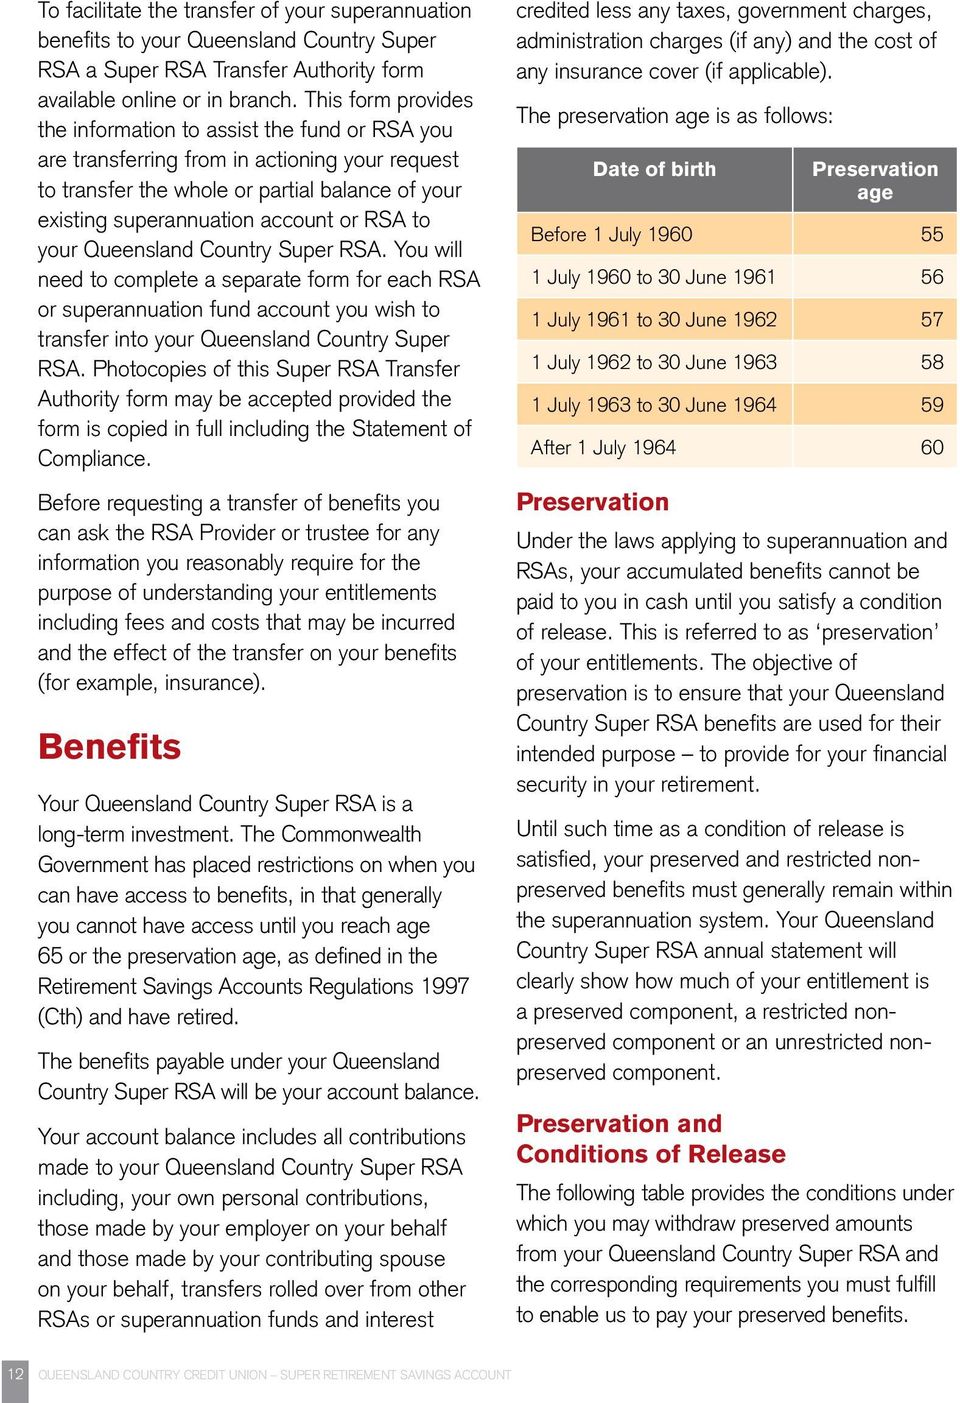 RSA to your Queensland Country Super RSA. You will need to complete a separate form for each RSA or superannuation fund account you wish to transfer into your Queensland Country Super RSA.